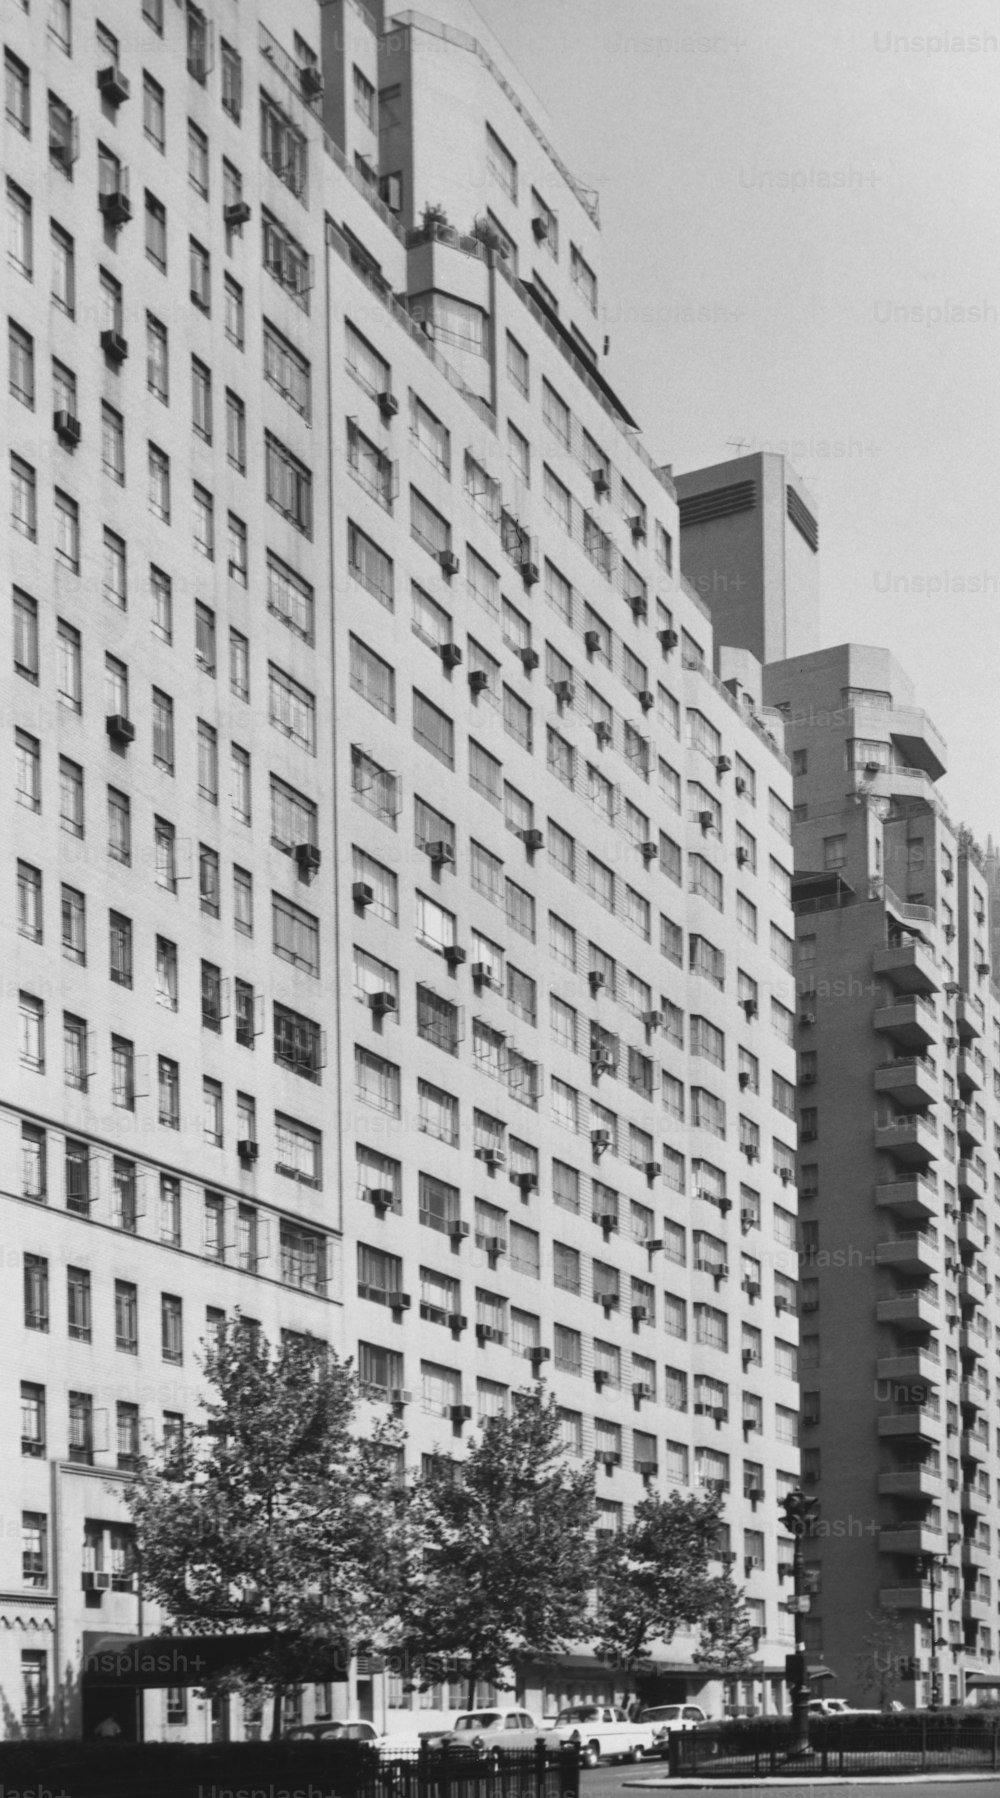 View of Block of Flats in an Unidentified Location. (Photo by George Marks/Retrofile/Getty Images)